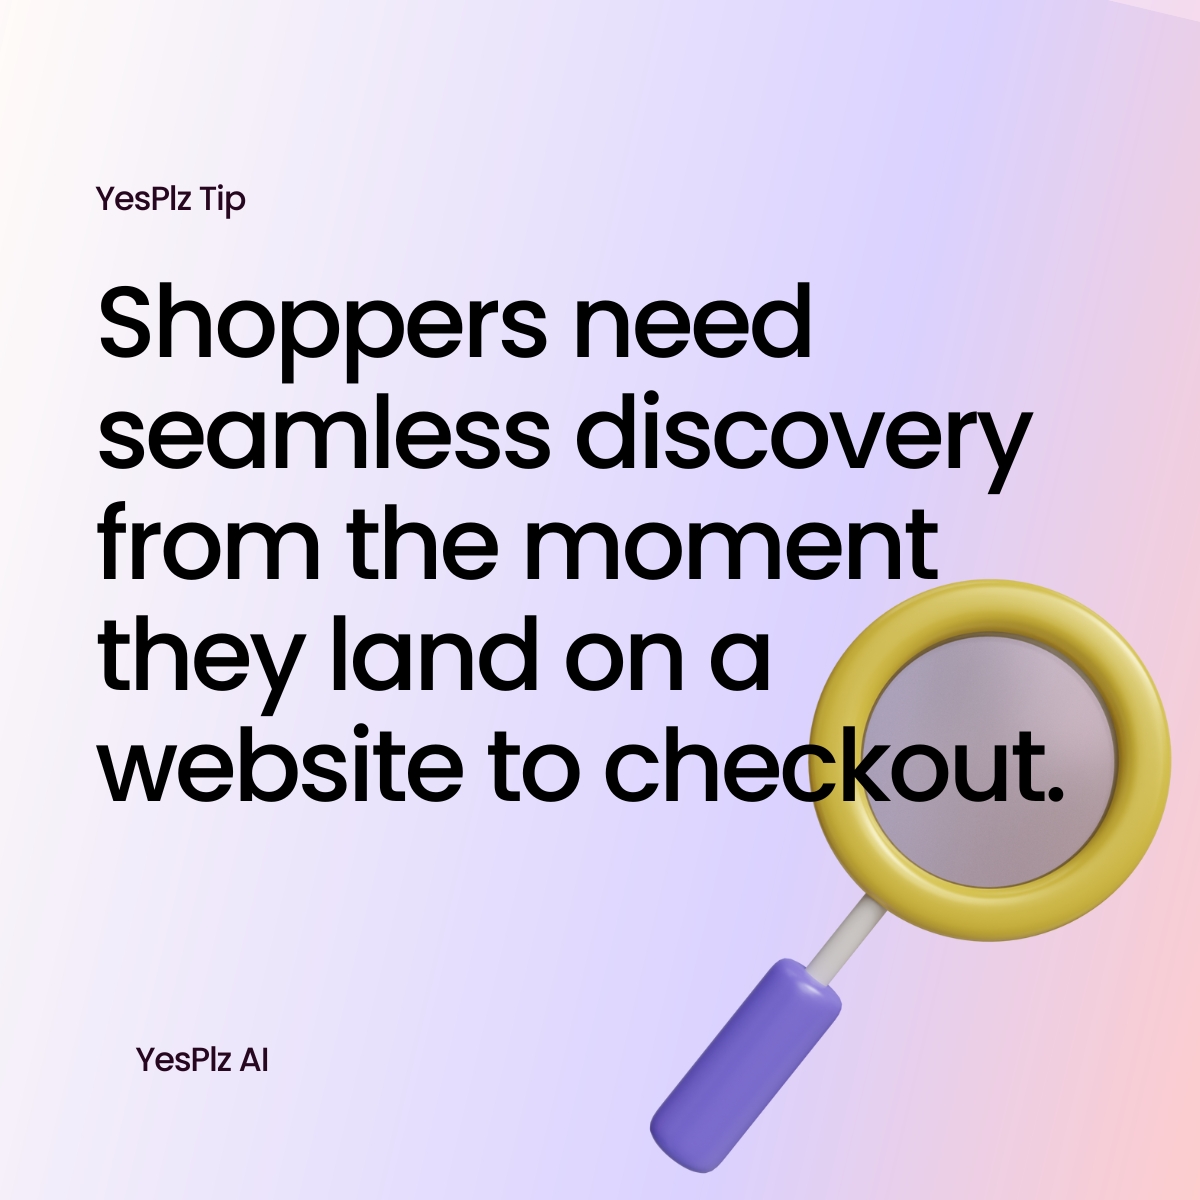 A 3D image of magnifying glass with text about eCommerce discovery journey